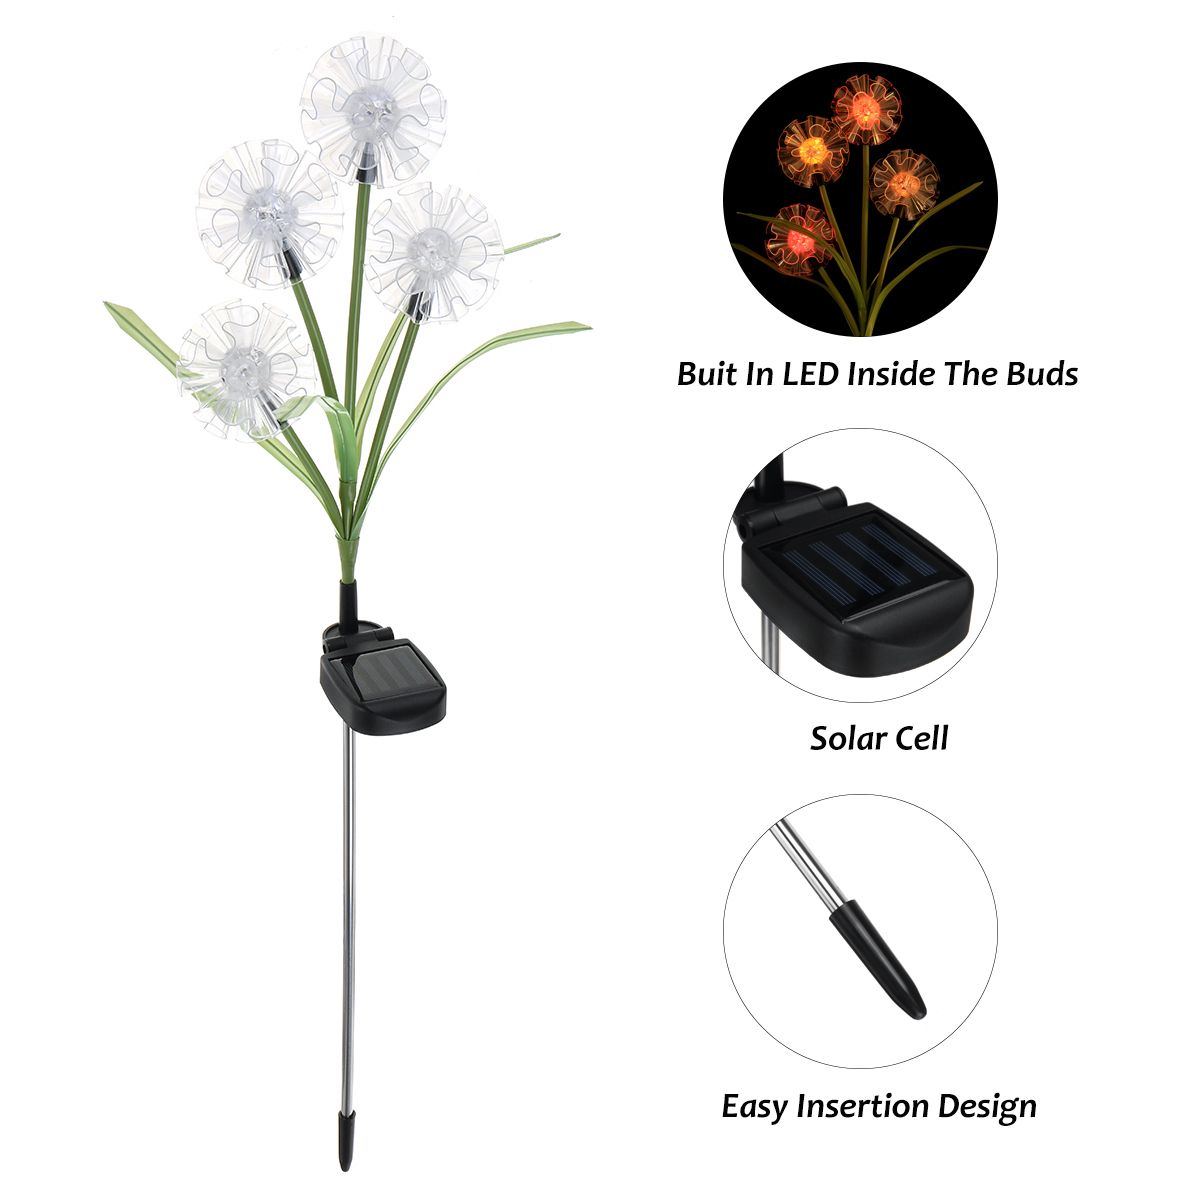 Solar-Powered-LED-Lawn-Light-Simulation-Colorful-Flower-Outdoor-Garden-Yard-Lamp-for-Outdoor-Path-Ho-1723001